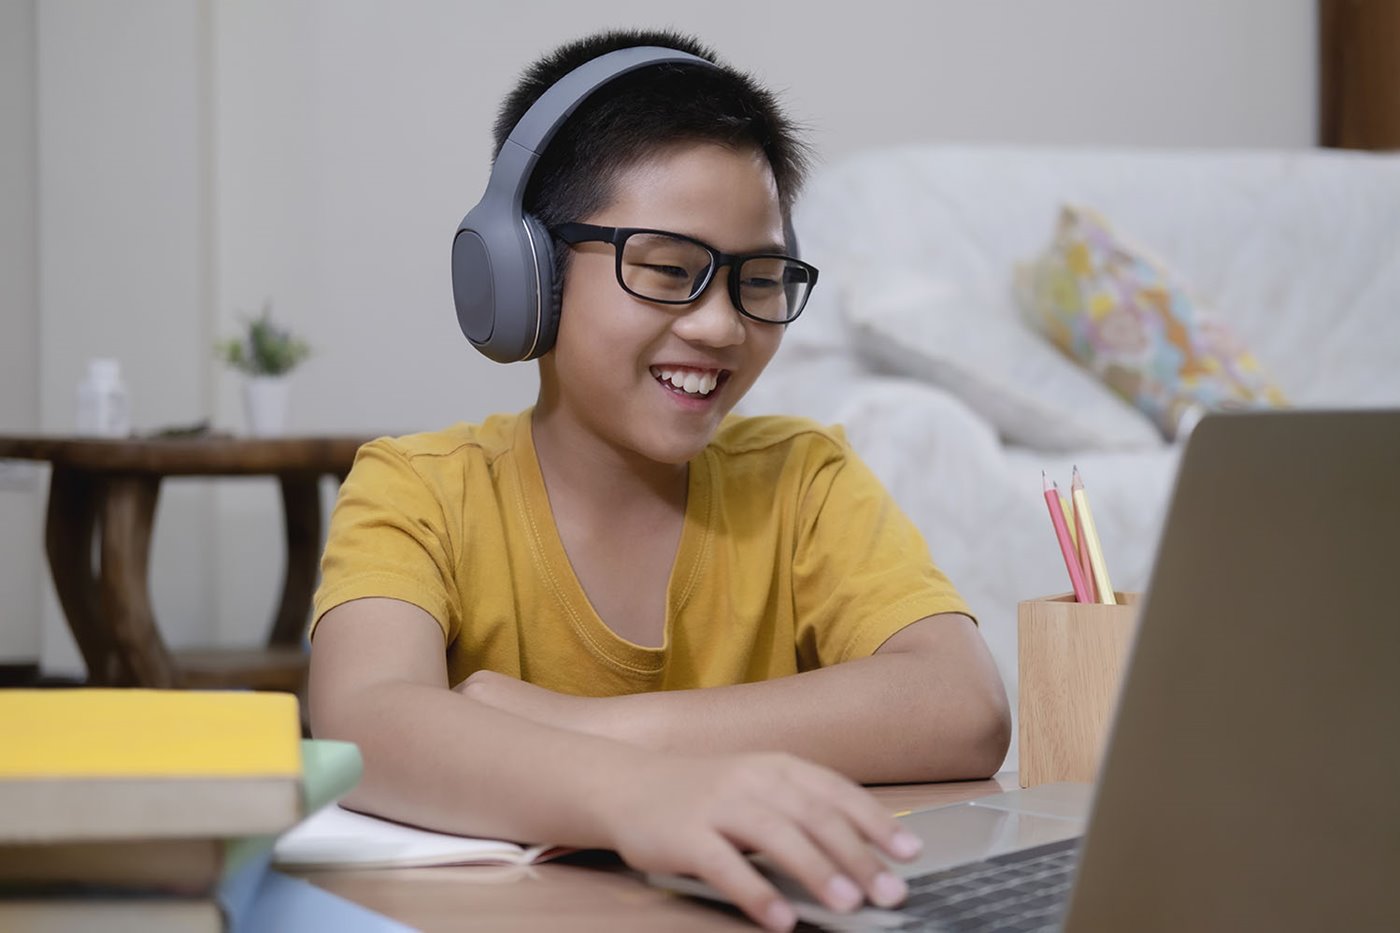 A young boy wears a headset and smiles while doing schoolwork on his laptop